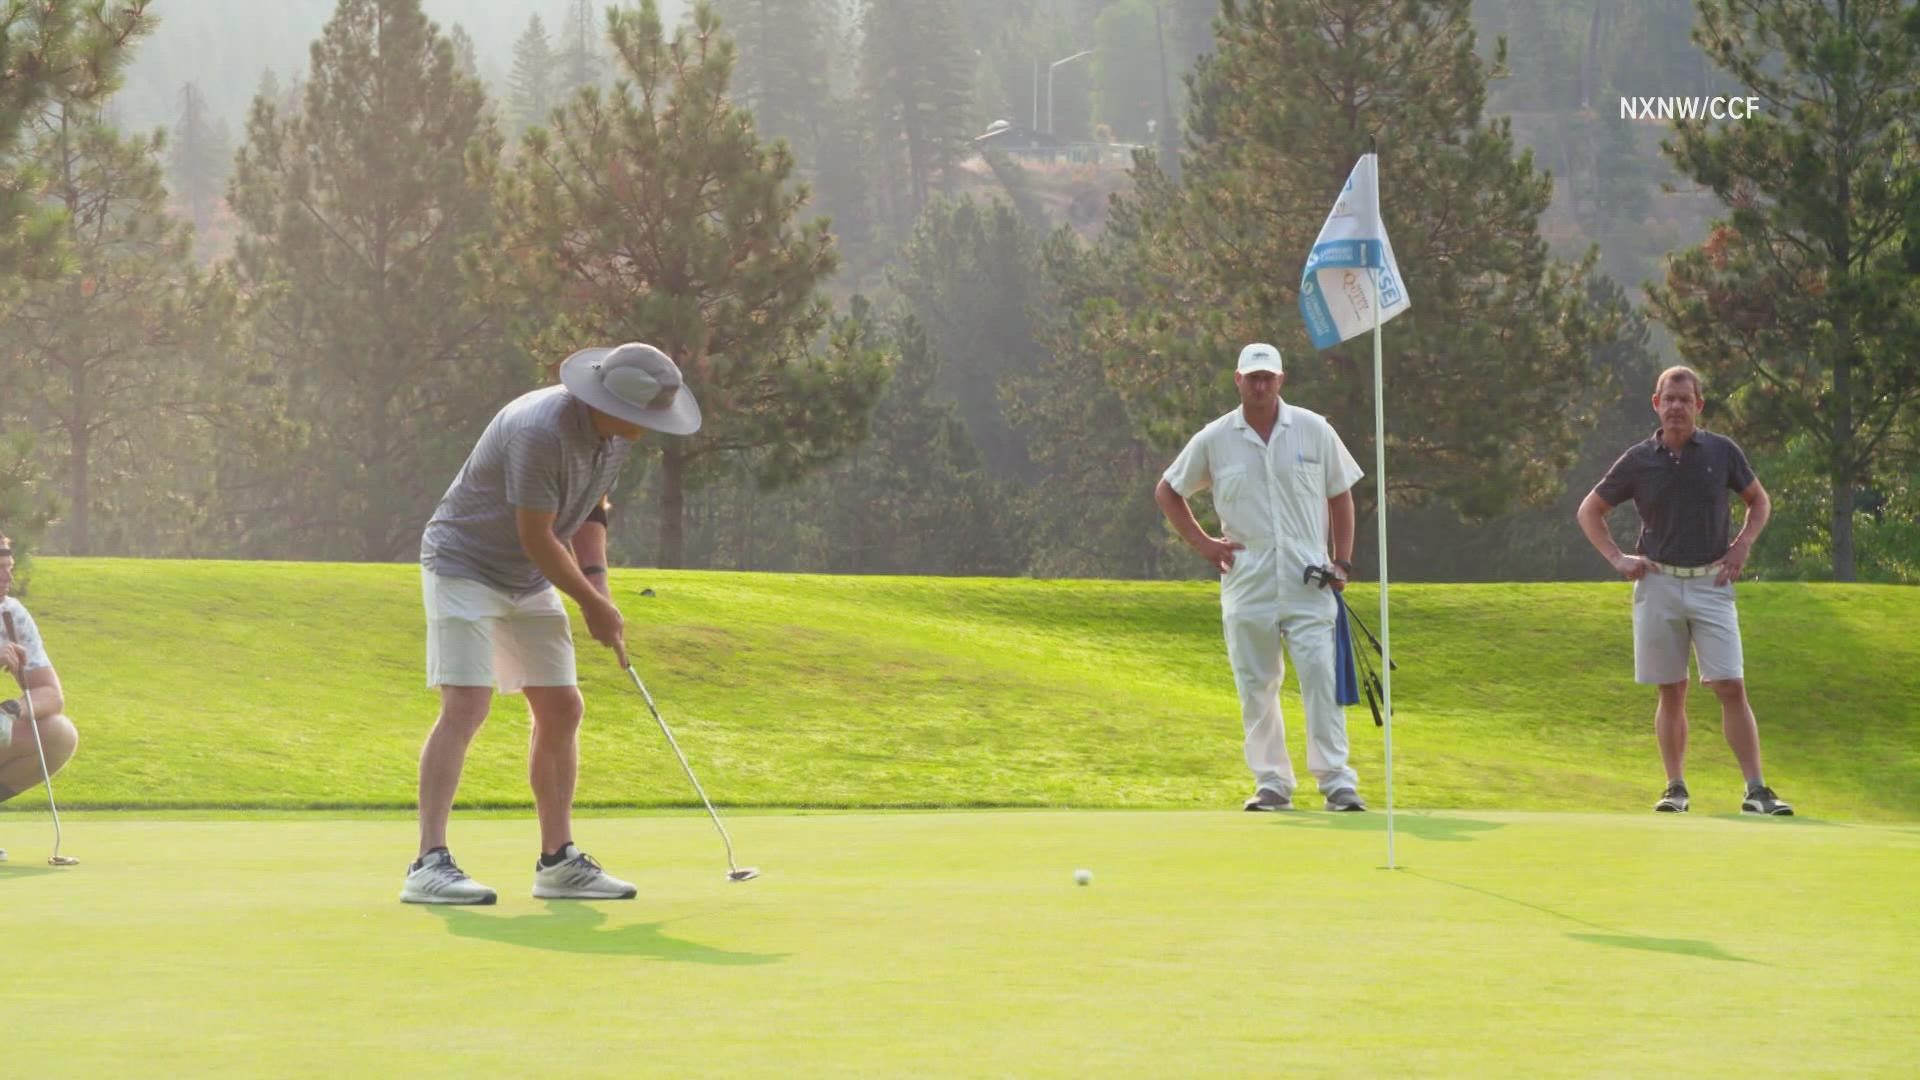 This weekend, Coeur d'Alene is the destination for a handful of hall of famers participating in the Showcase Golf Tournament at the Coeur d'Alene Resort.